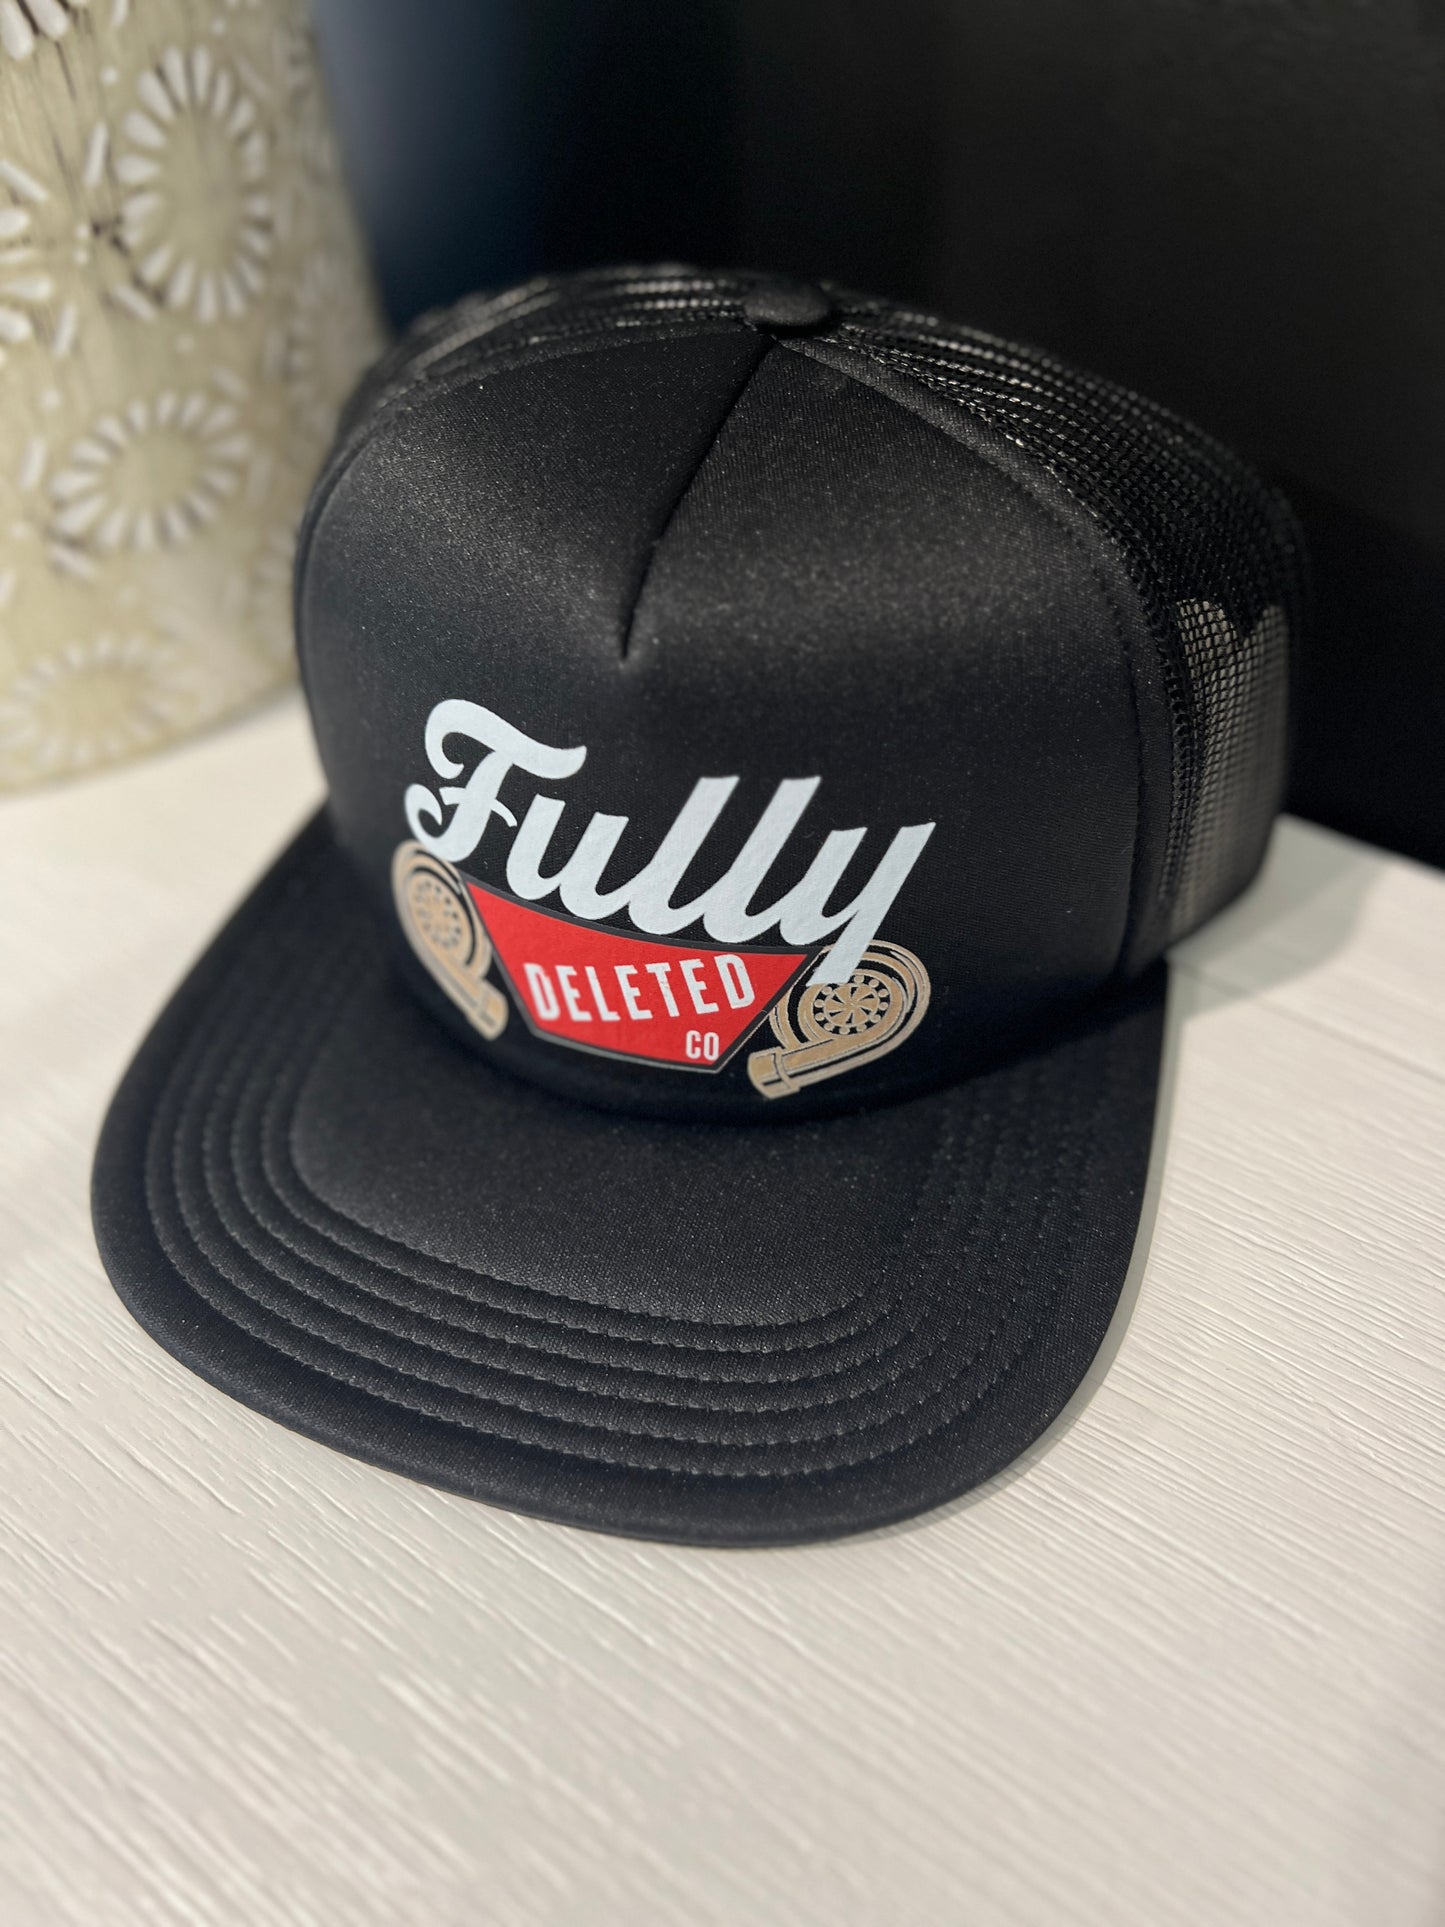 Fully Deleted Hat